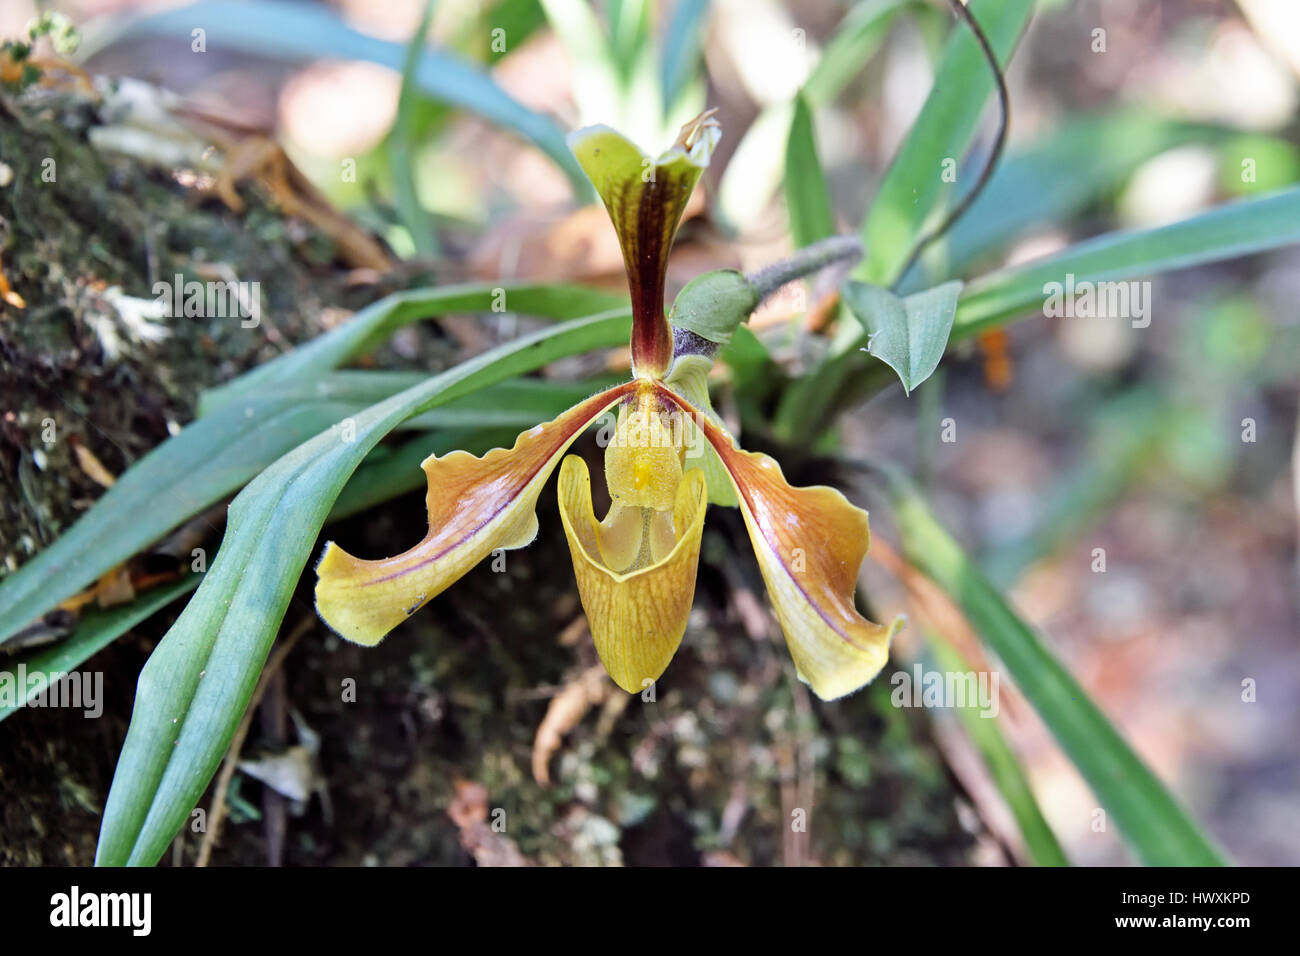 A Slipper Orchid (Paphiopedilum villosum) growing on a tree trunk in the forest in North East Thailand Stock Photo